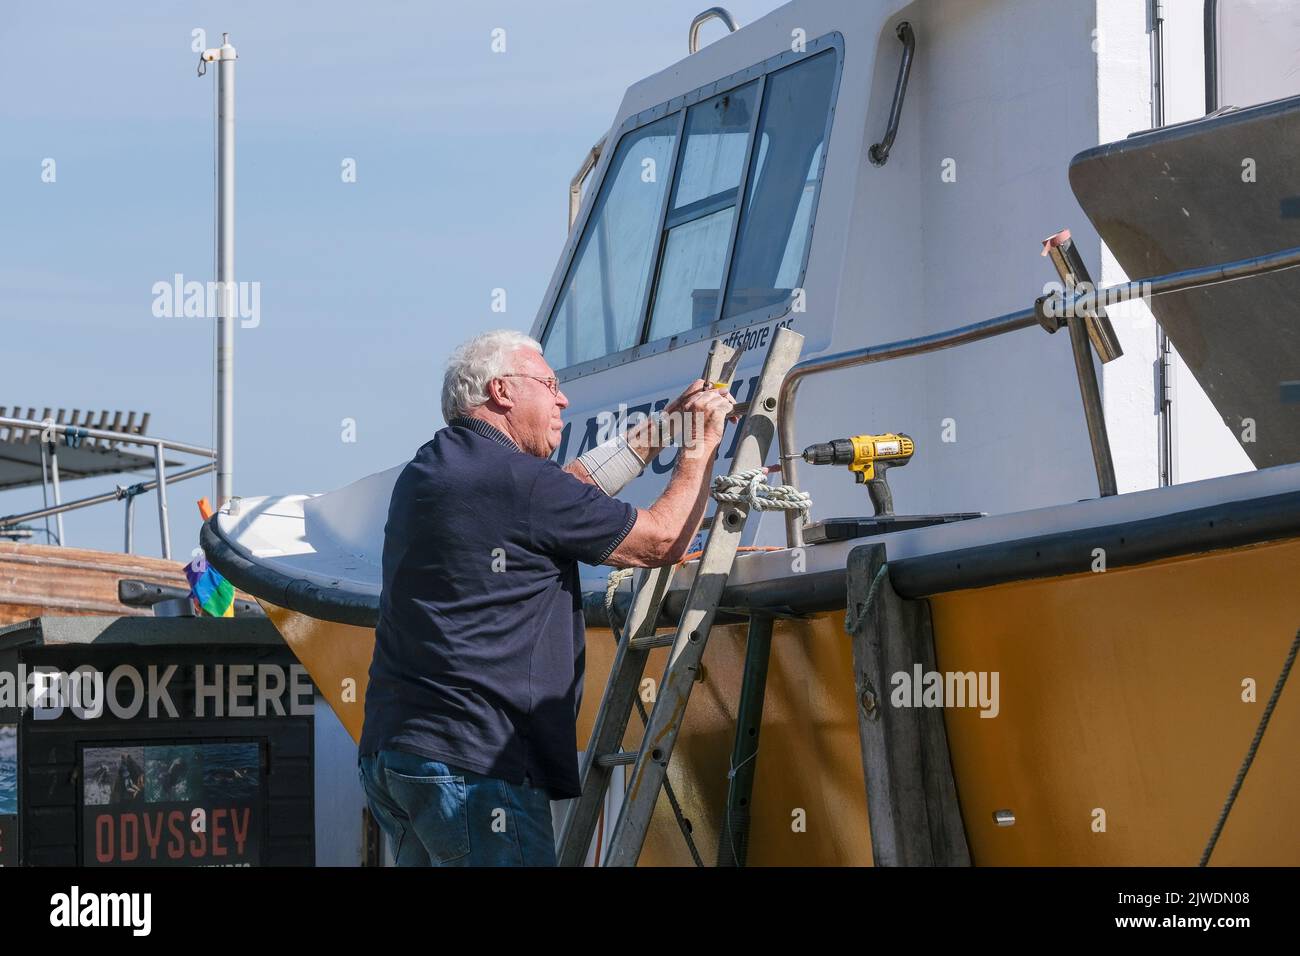 A mature man on a ladder carrying out maintenance on a boat in Newquay Harbour in England in the UK. Stock Photo